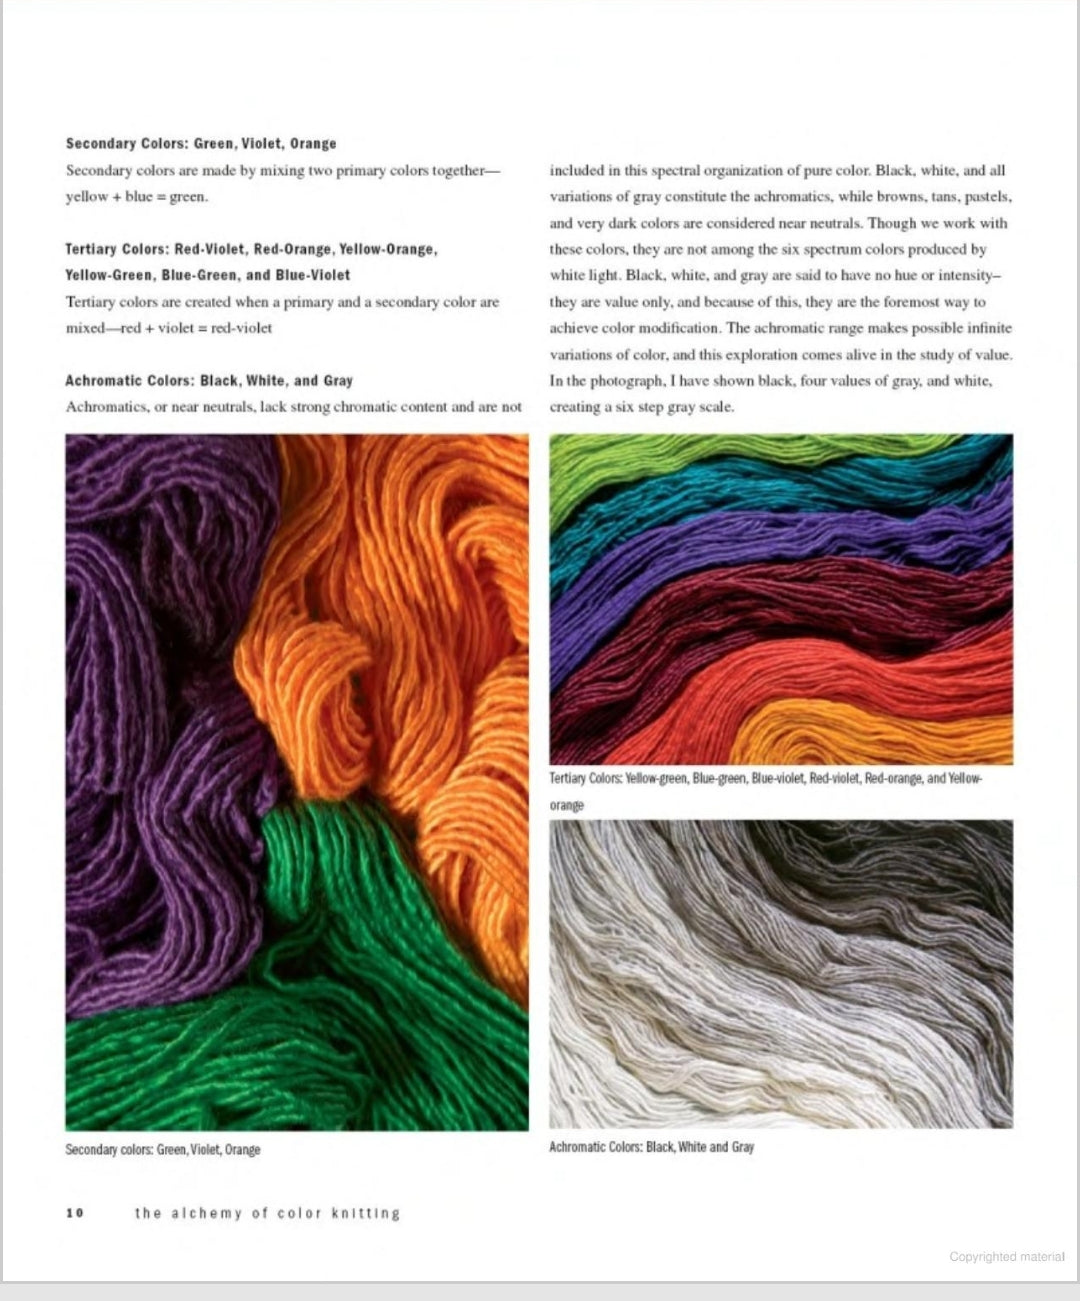 The Alchemy of Color Knitting: The Art and Technique of Mastering Exquisite Palettes